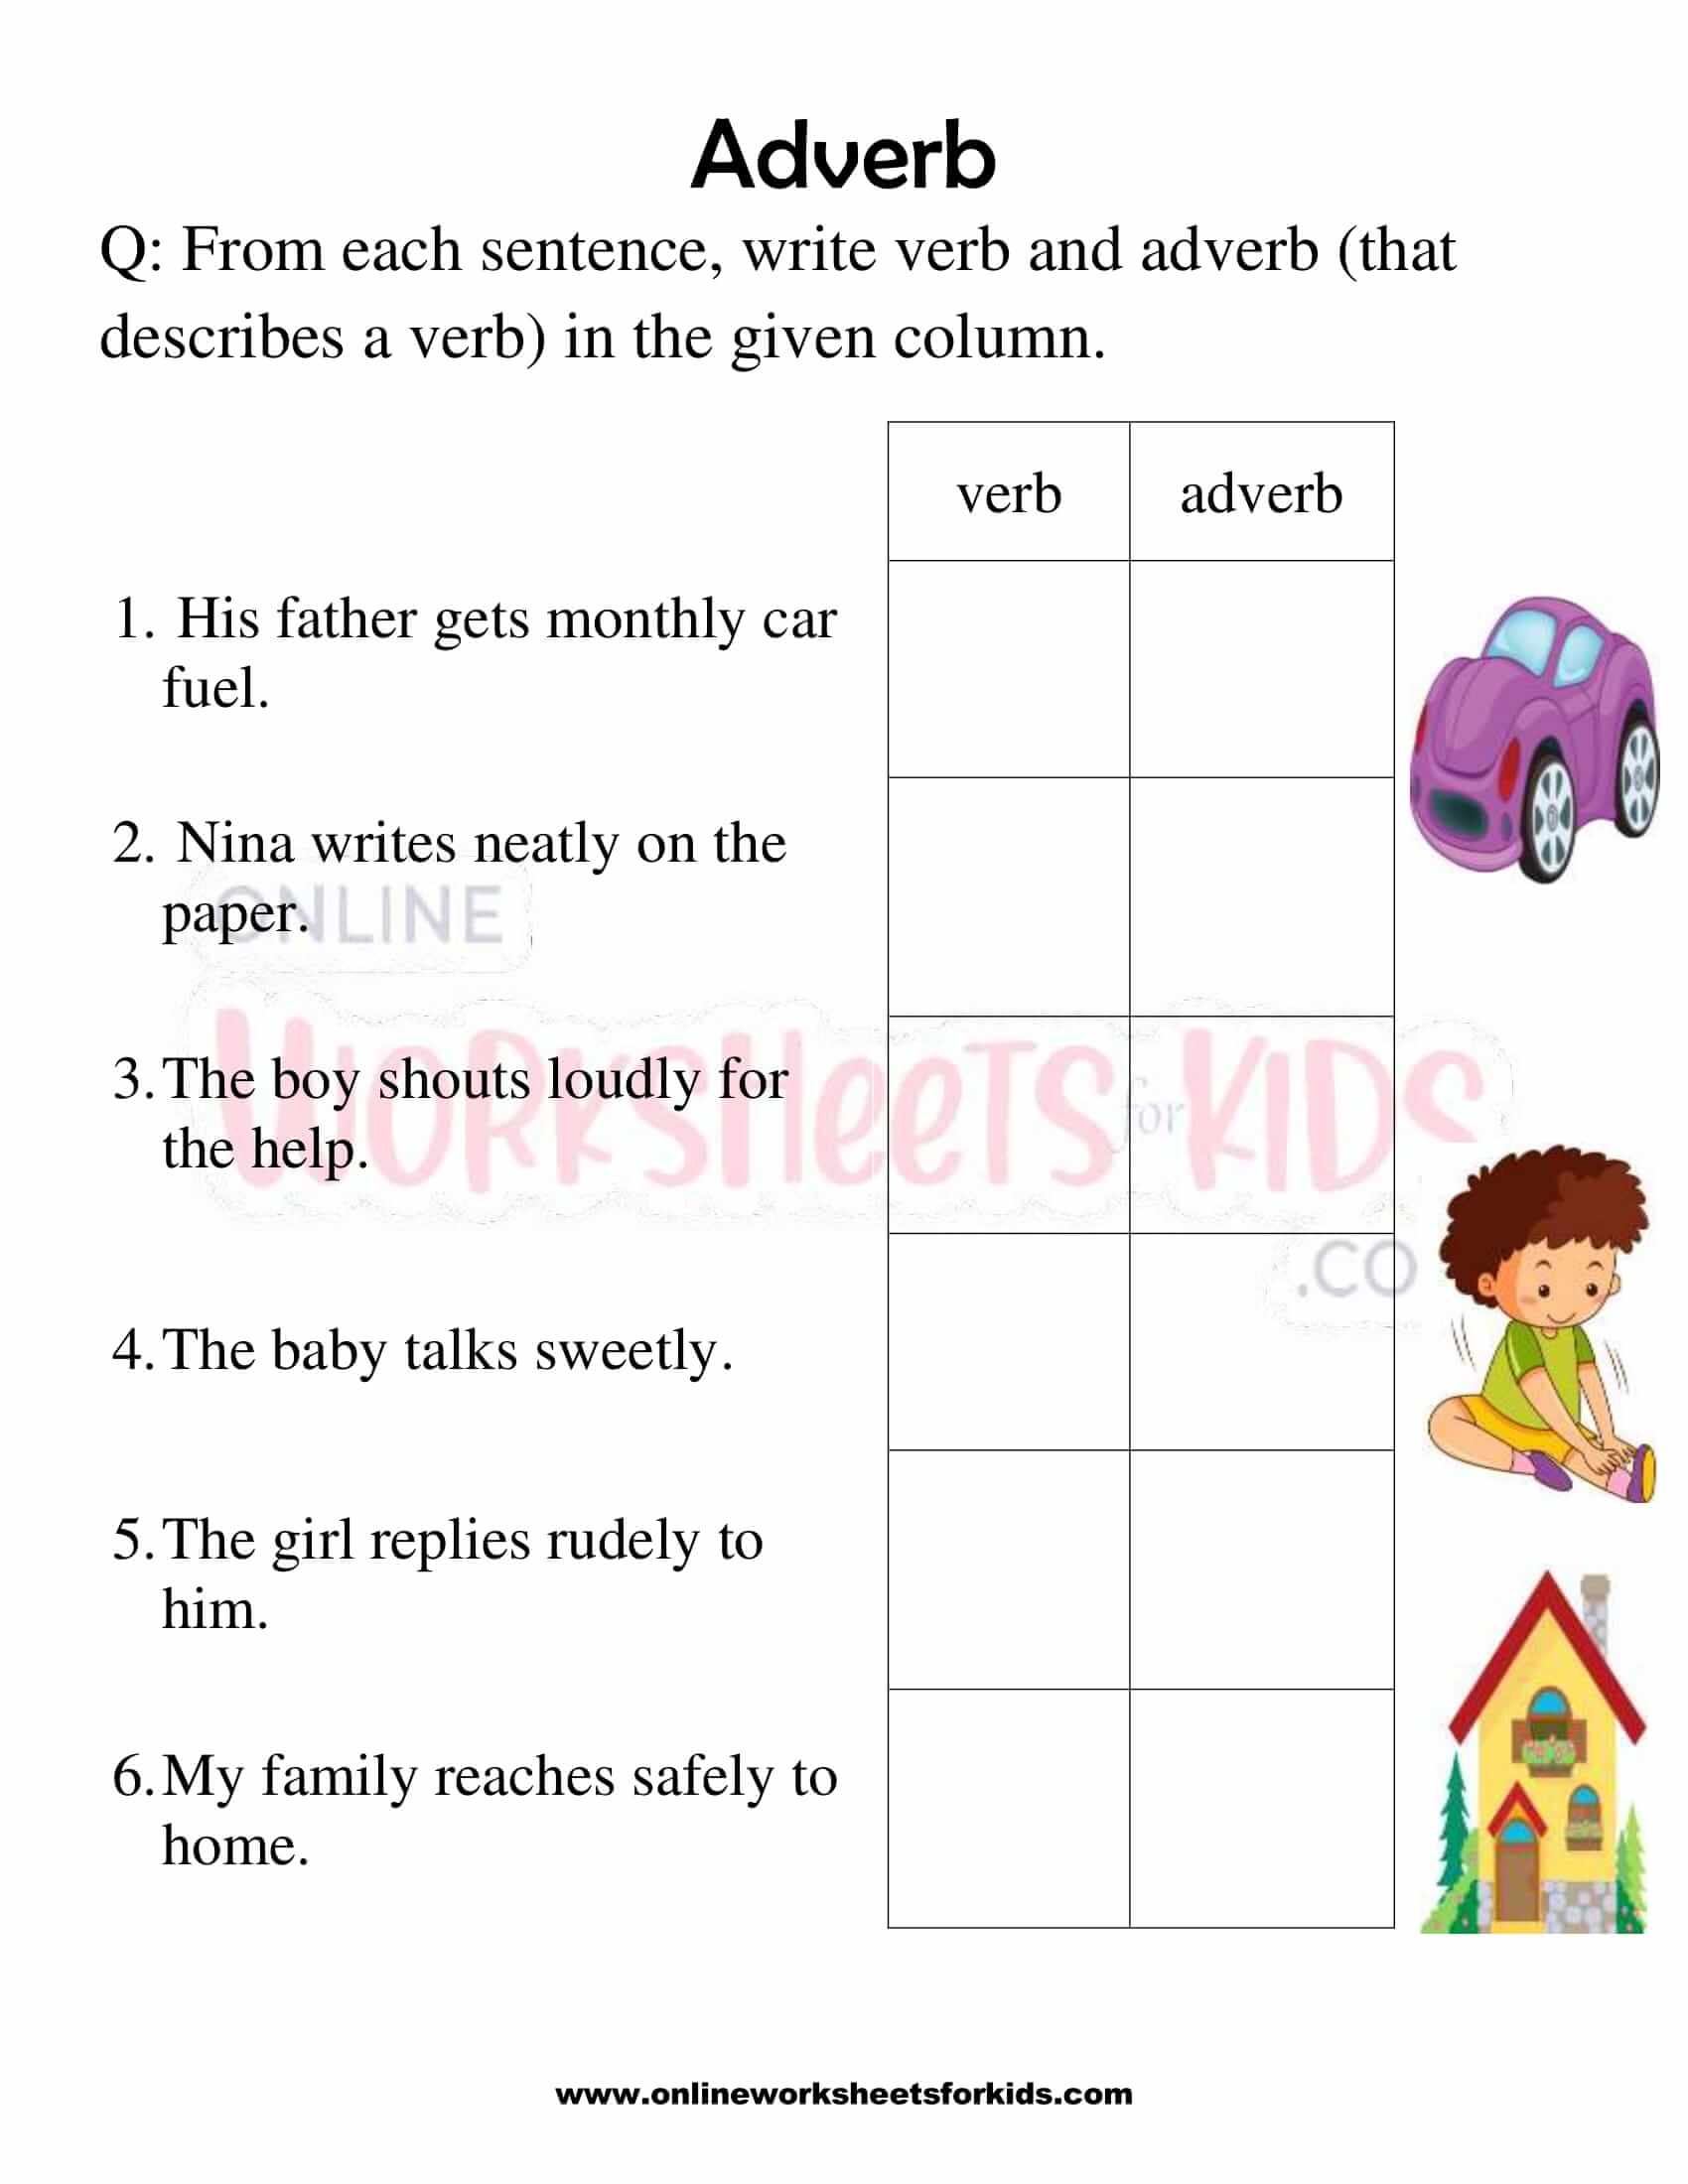 Adverb Live Worksheet For Class 8